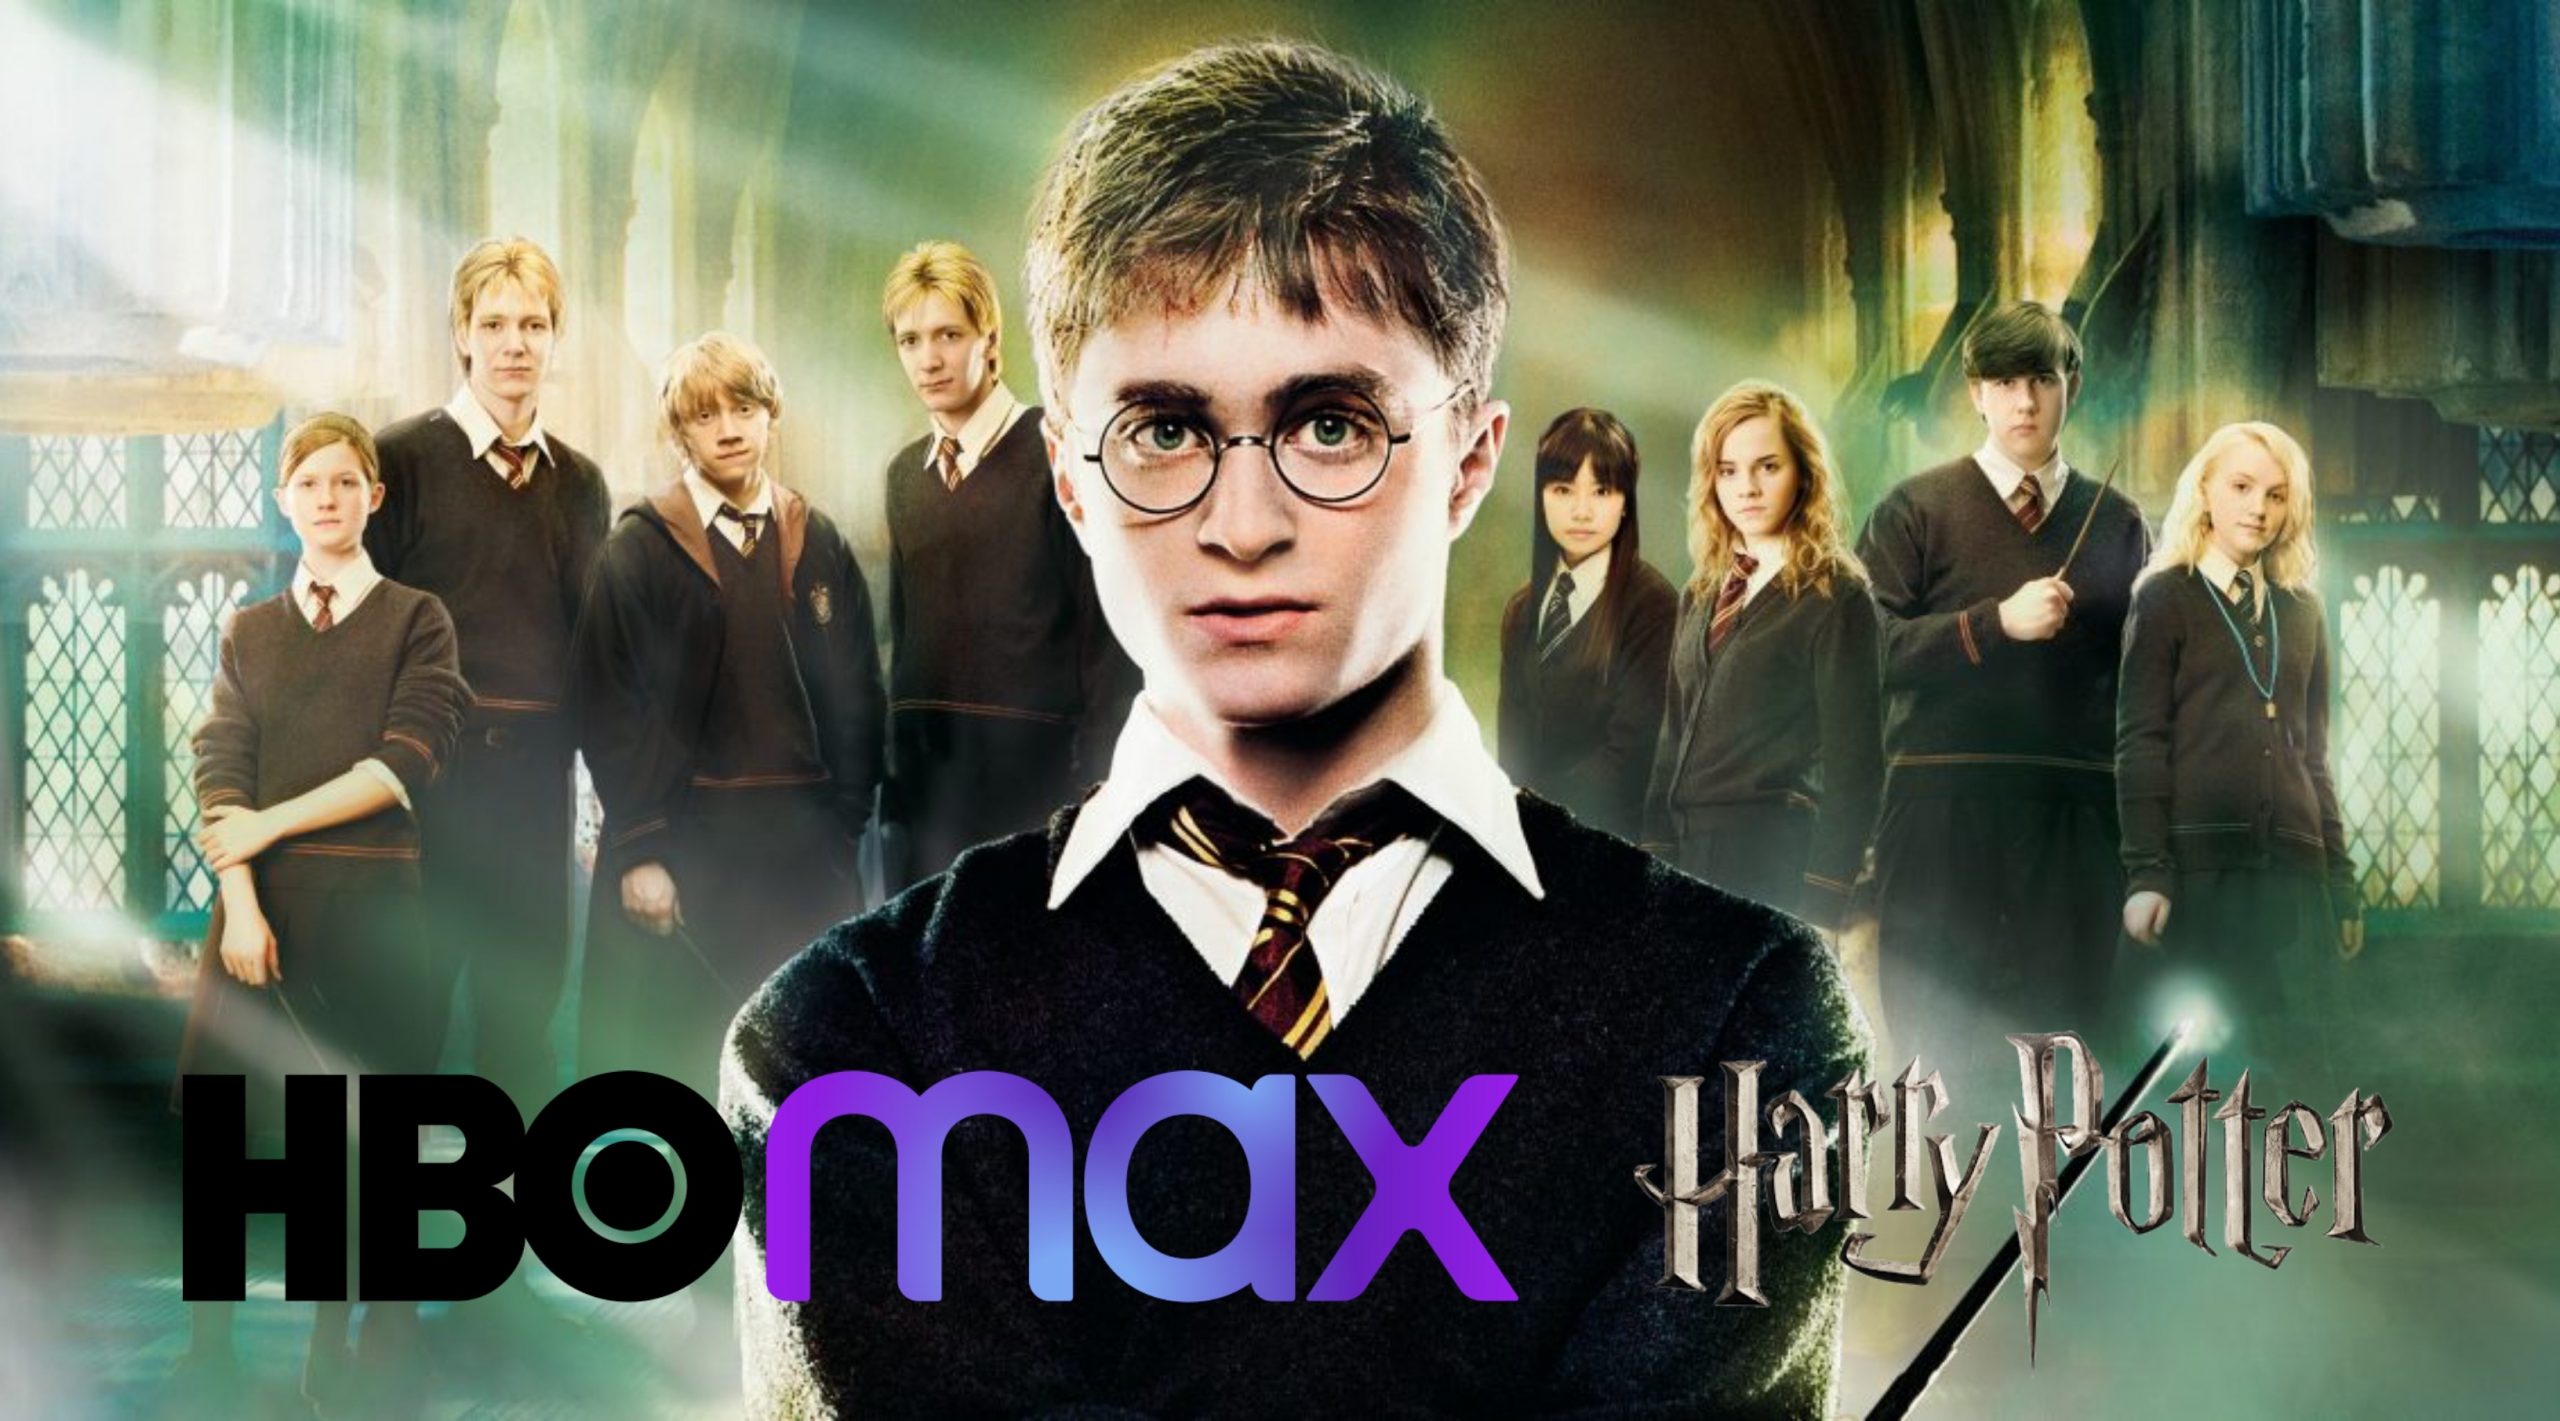 All 8 ‘Harry Potter’ Films Now Available to Stream on HBO Max